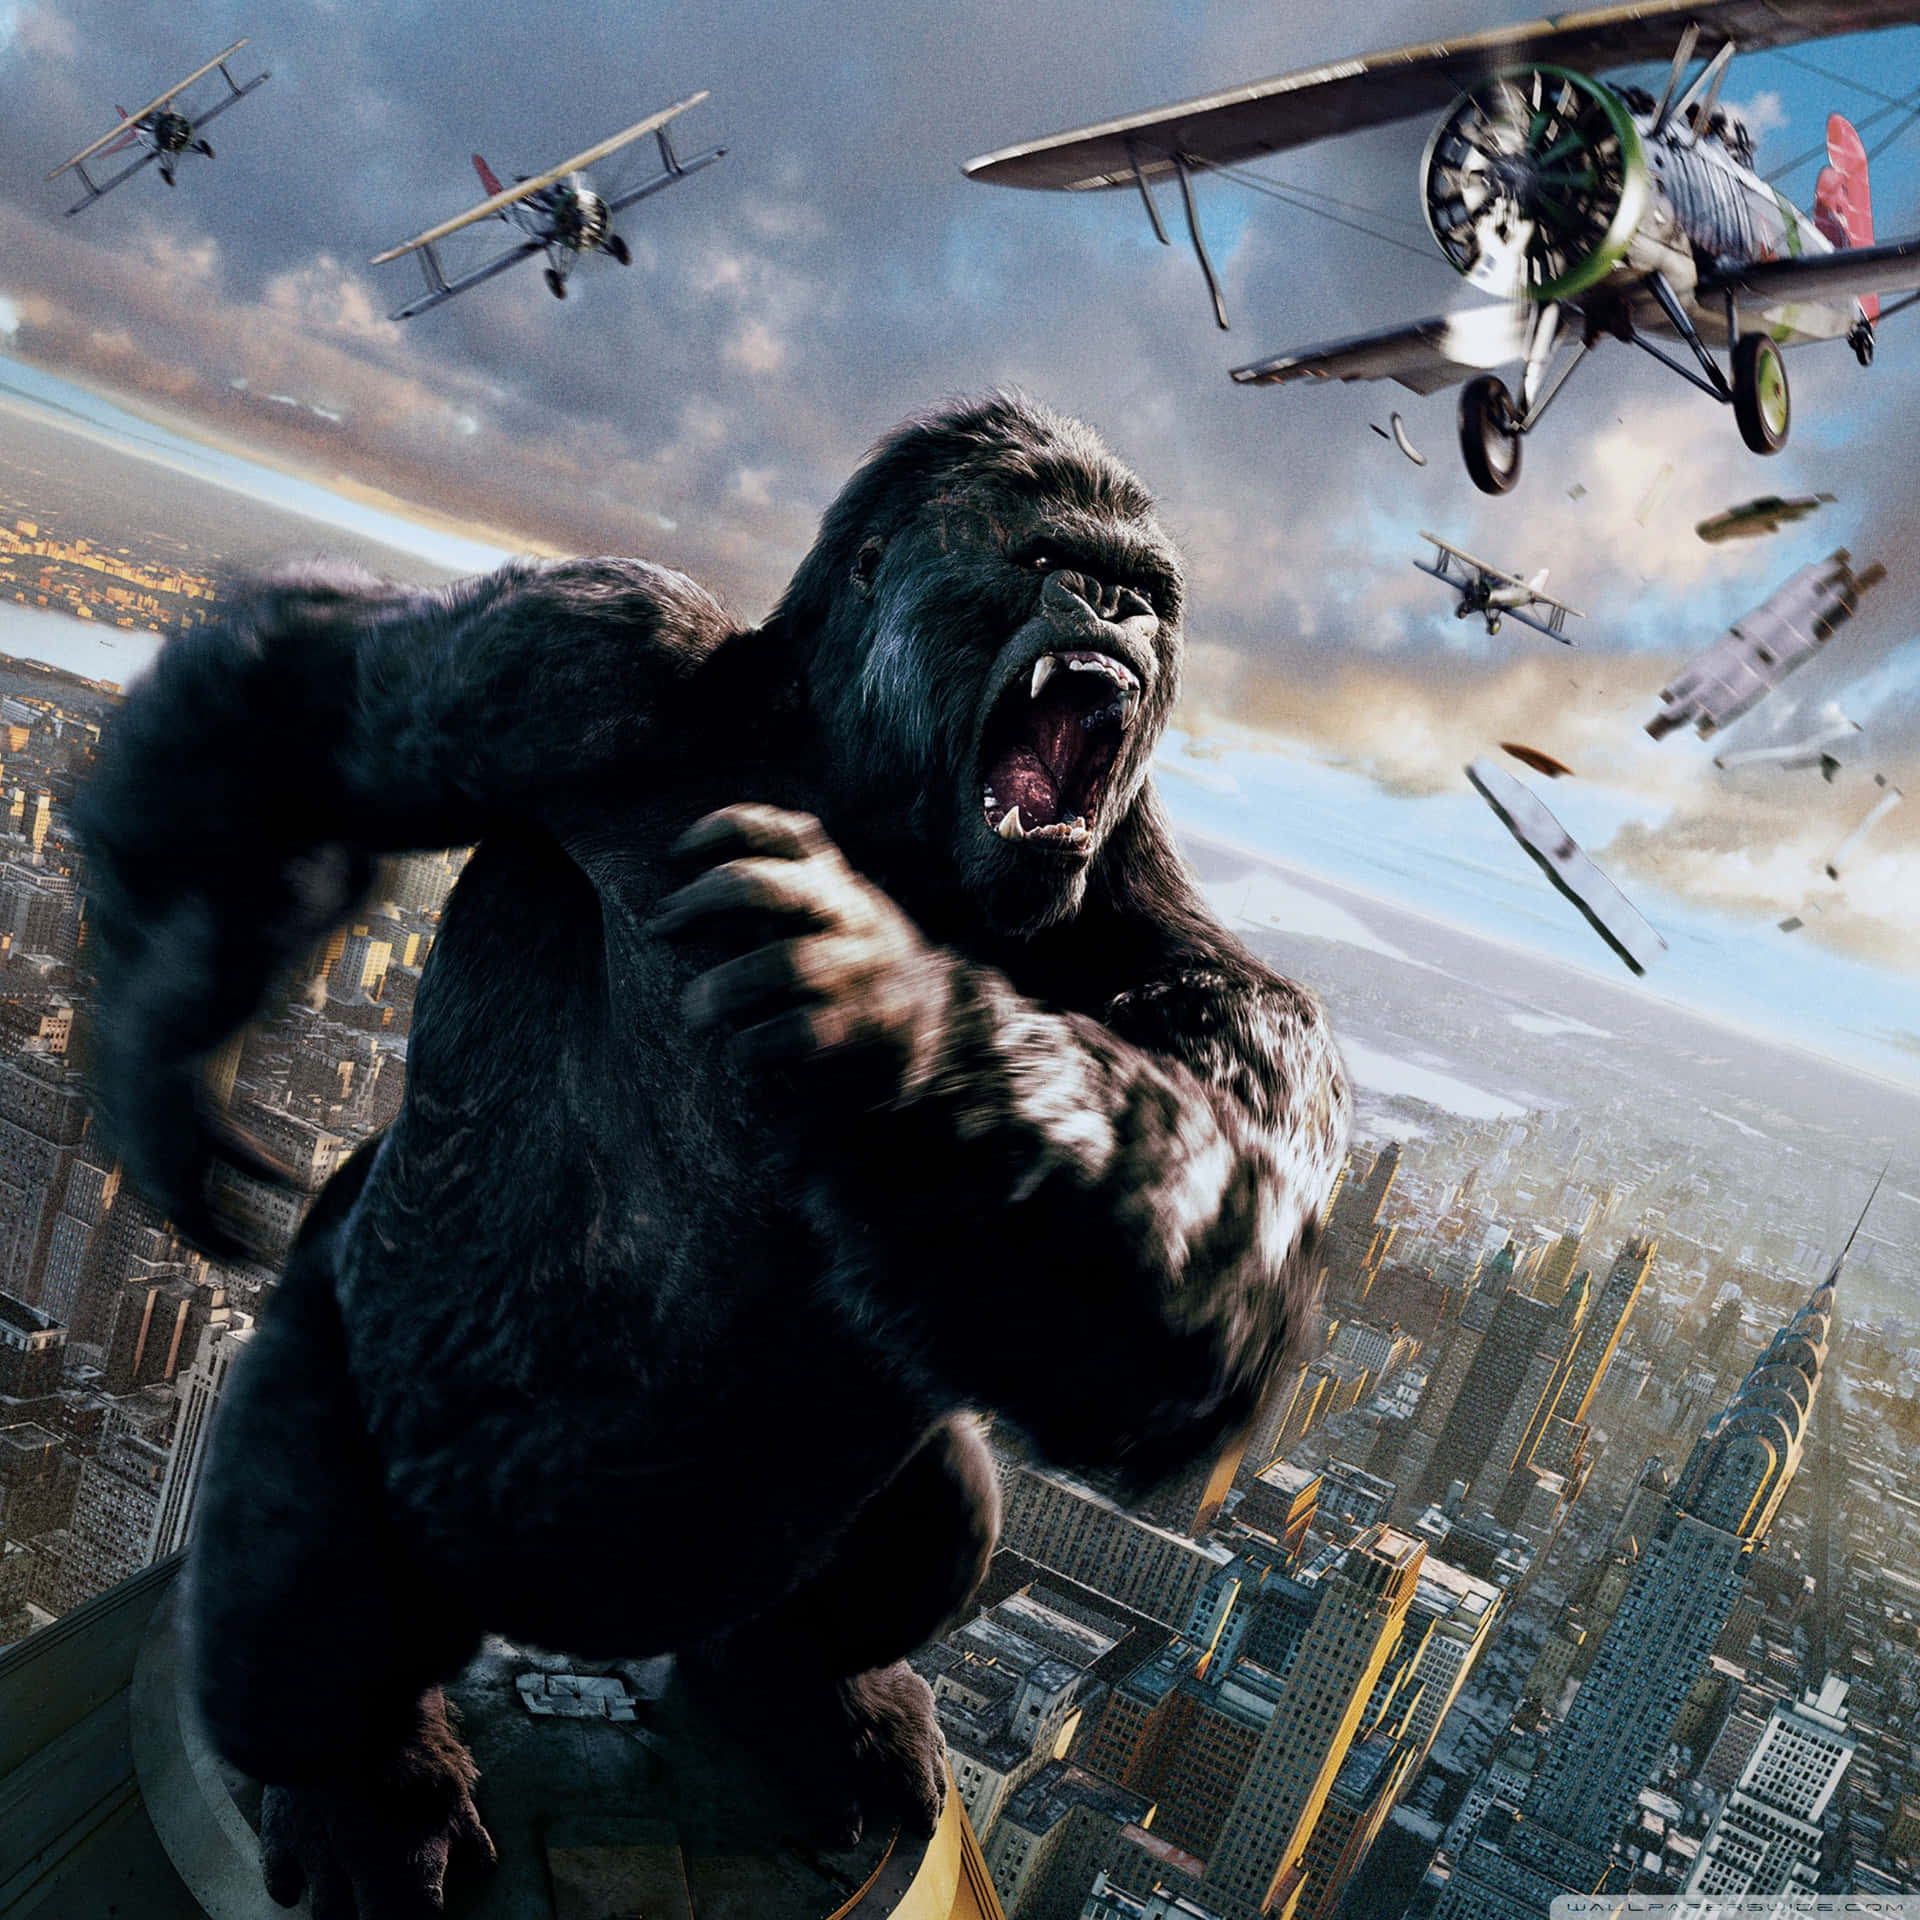 Get immersed in the action of King Kong in 4K Wallpaper